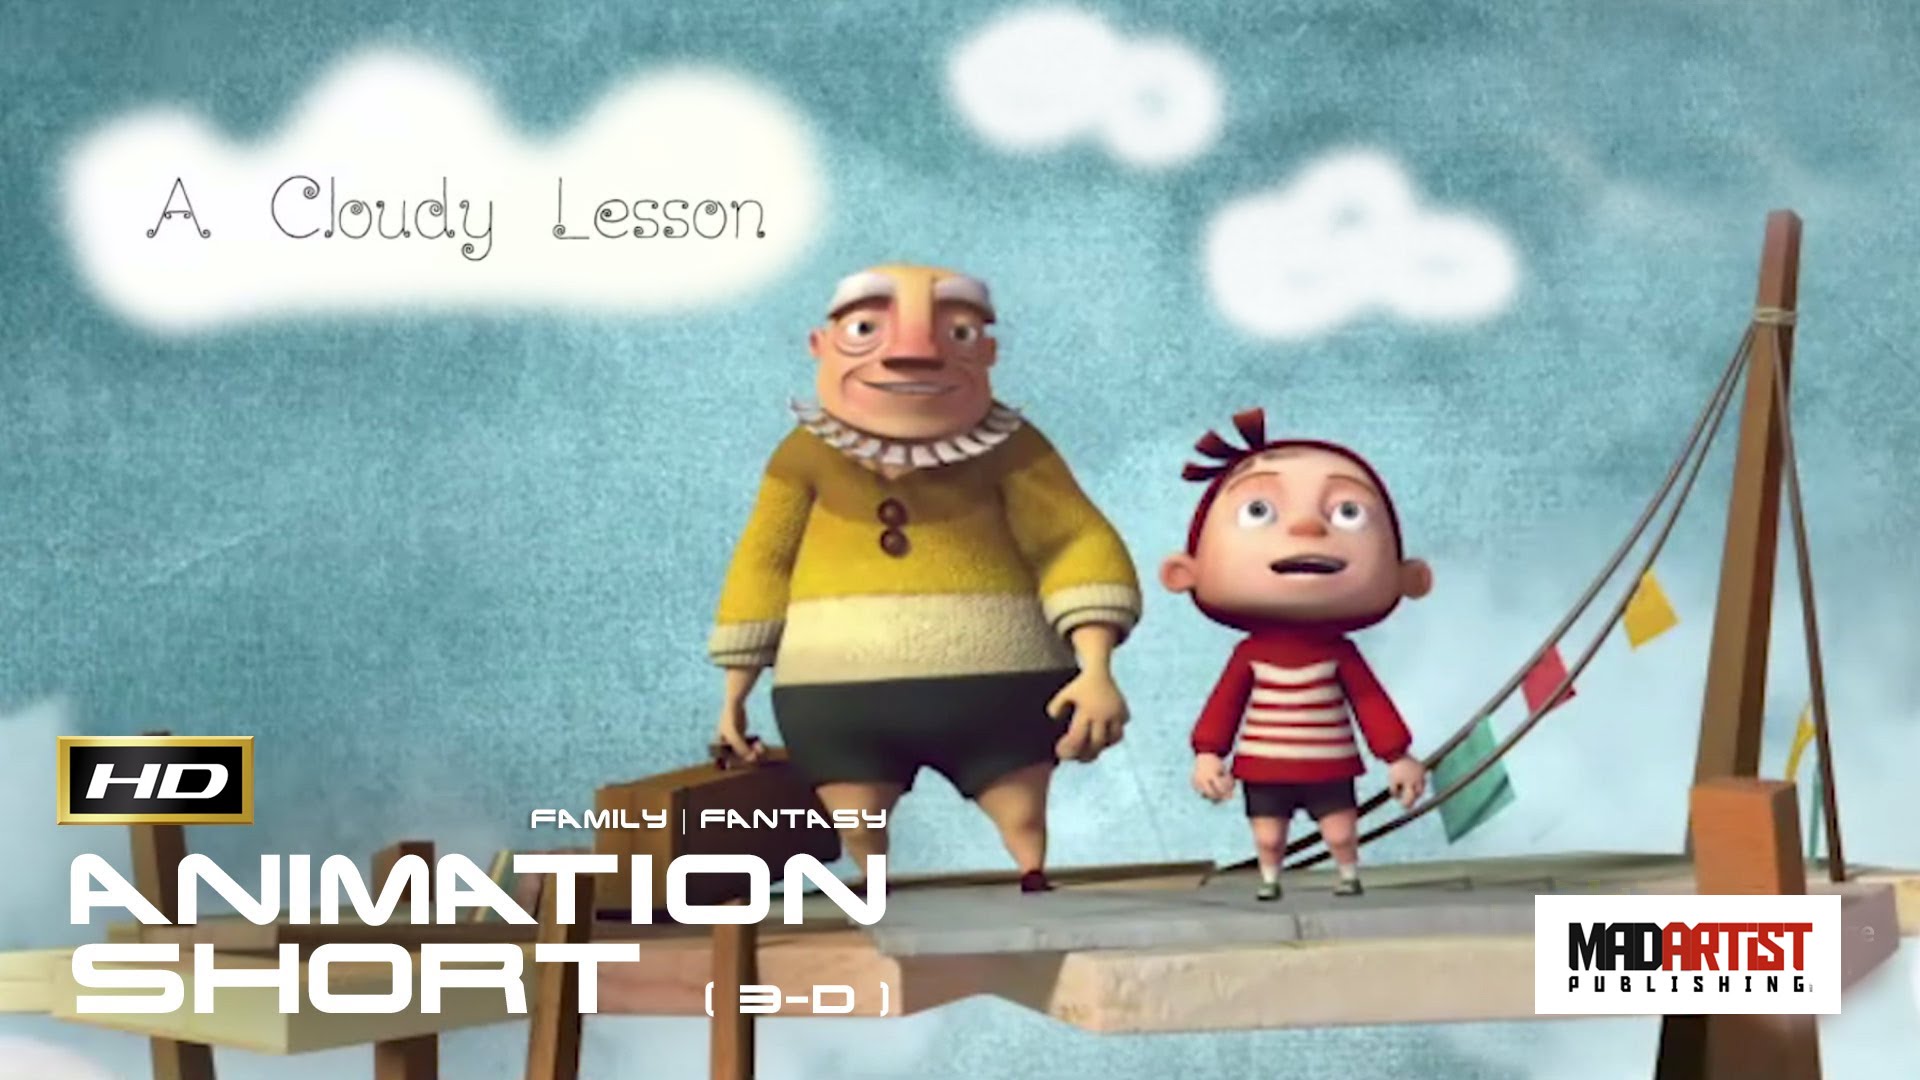 A CLOUDY LESSON - Creative 3D Animated Short